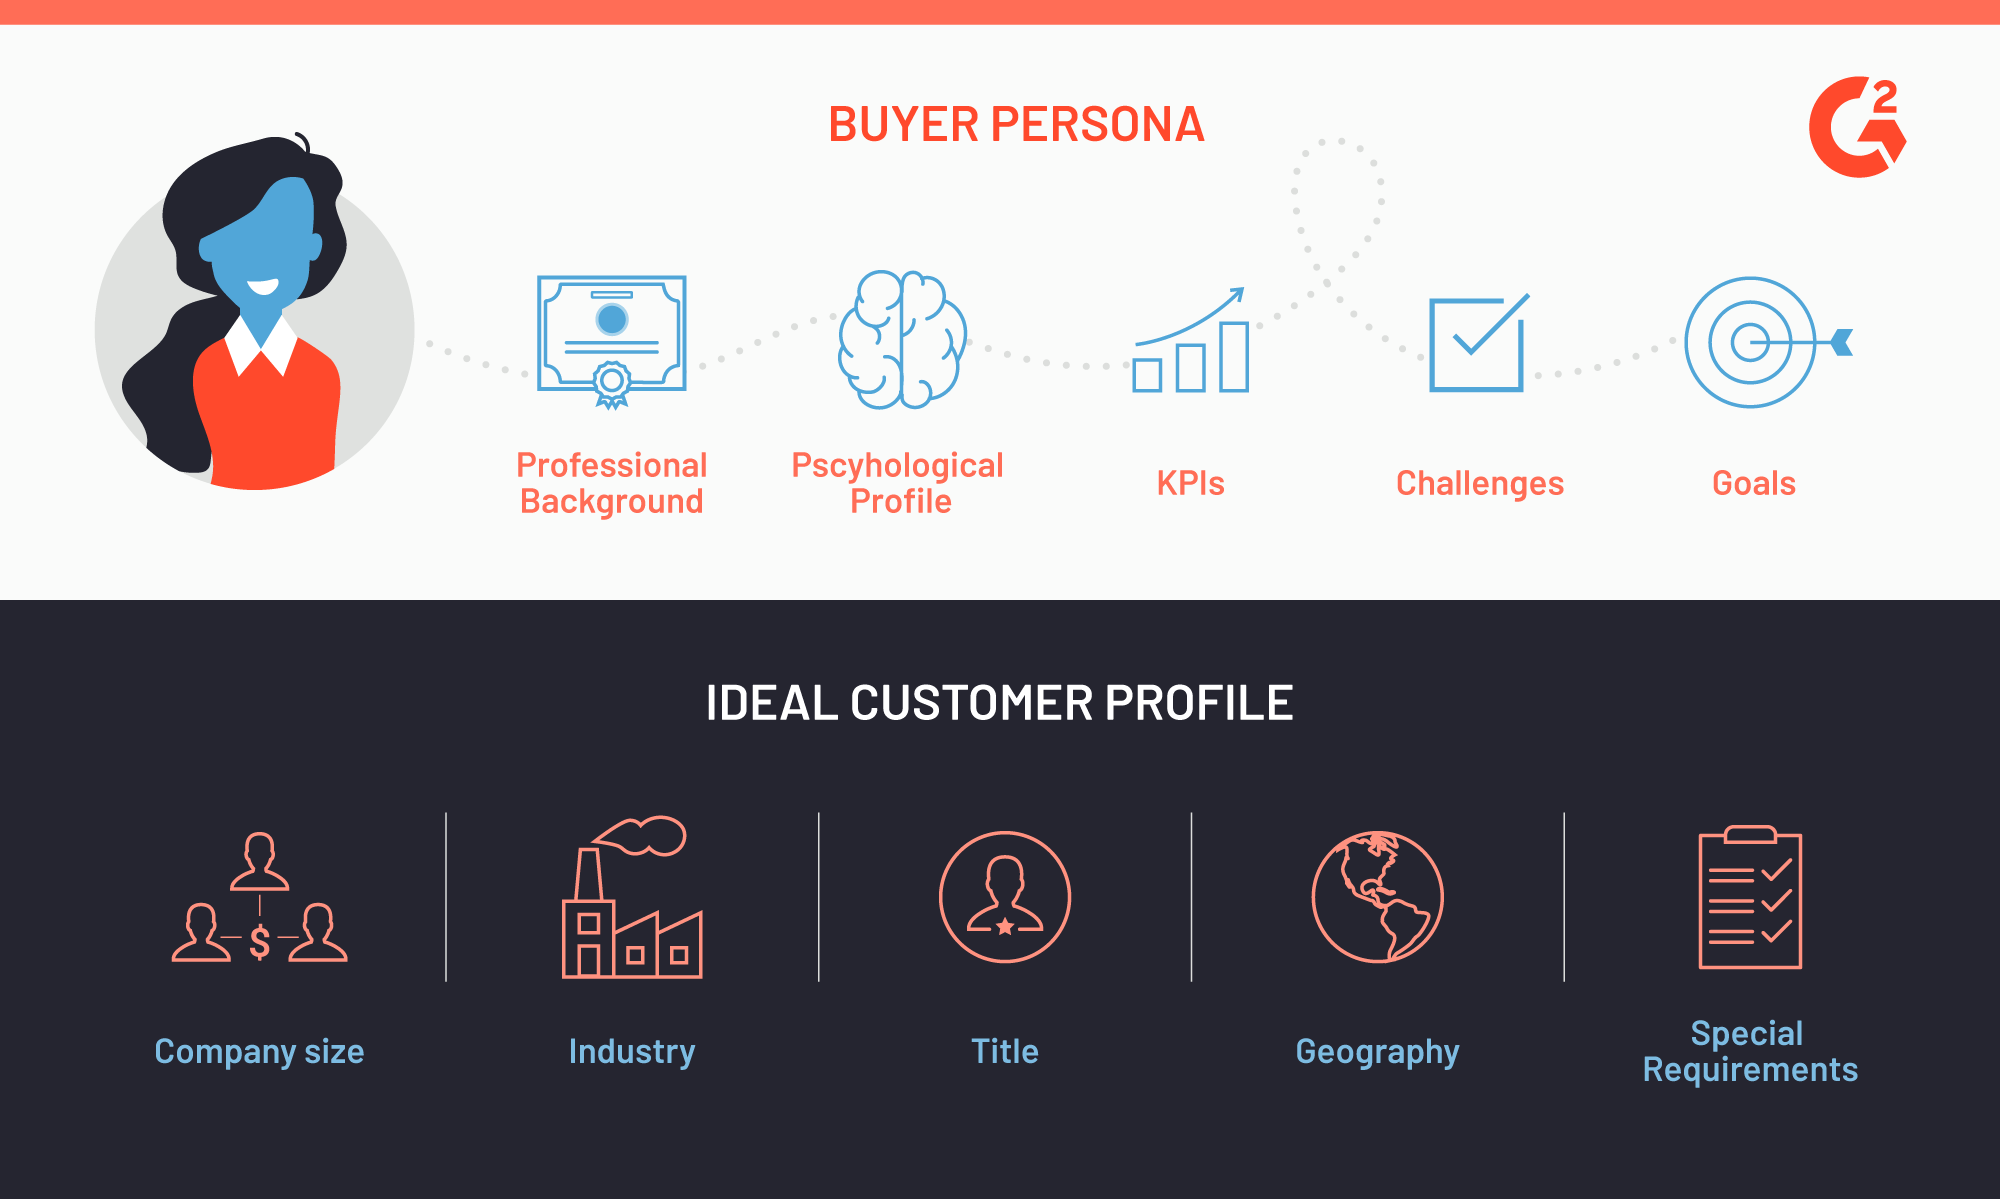 What is an Ideal Customer Profile?